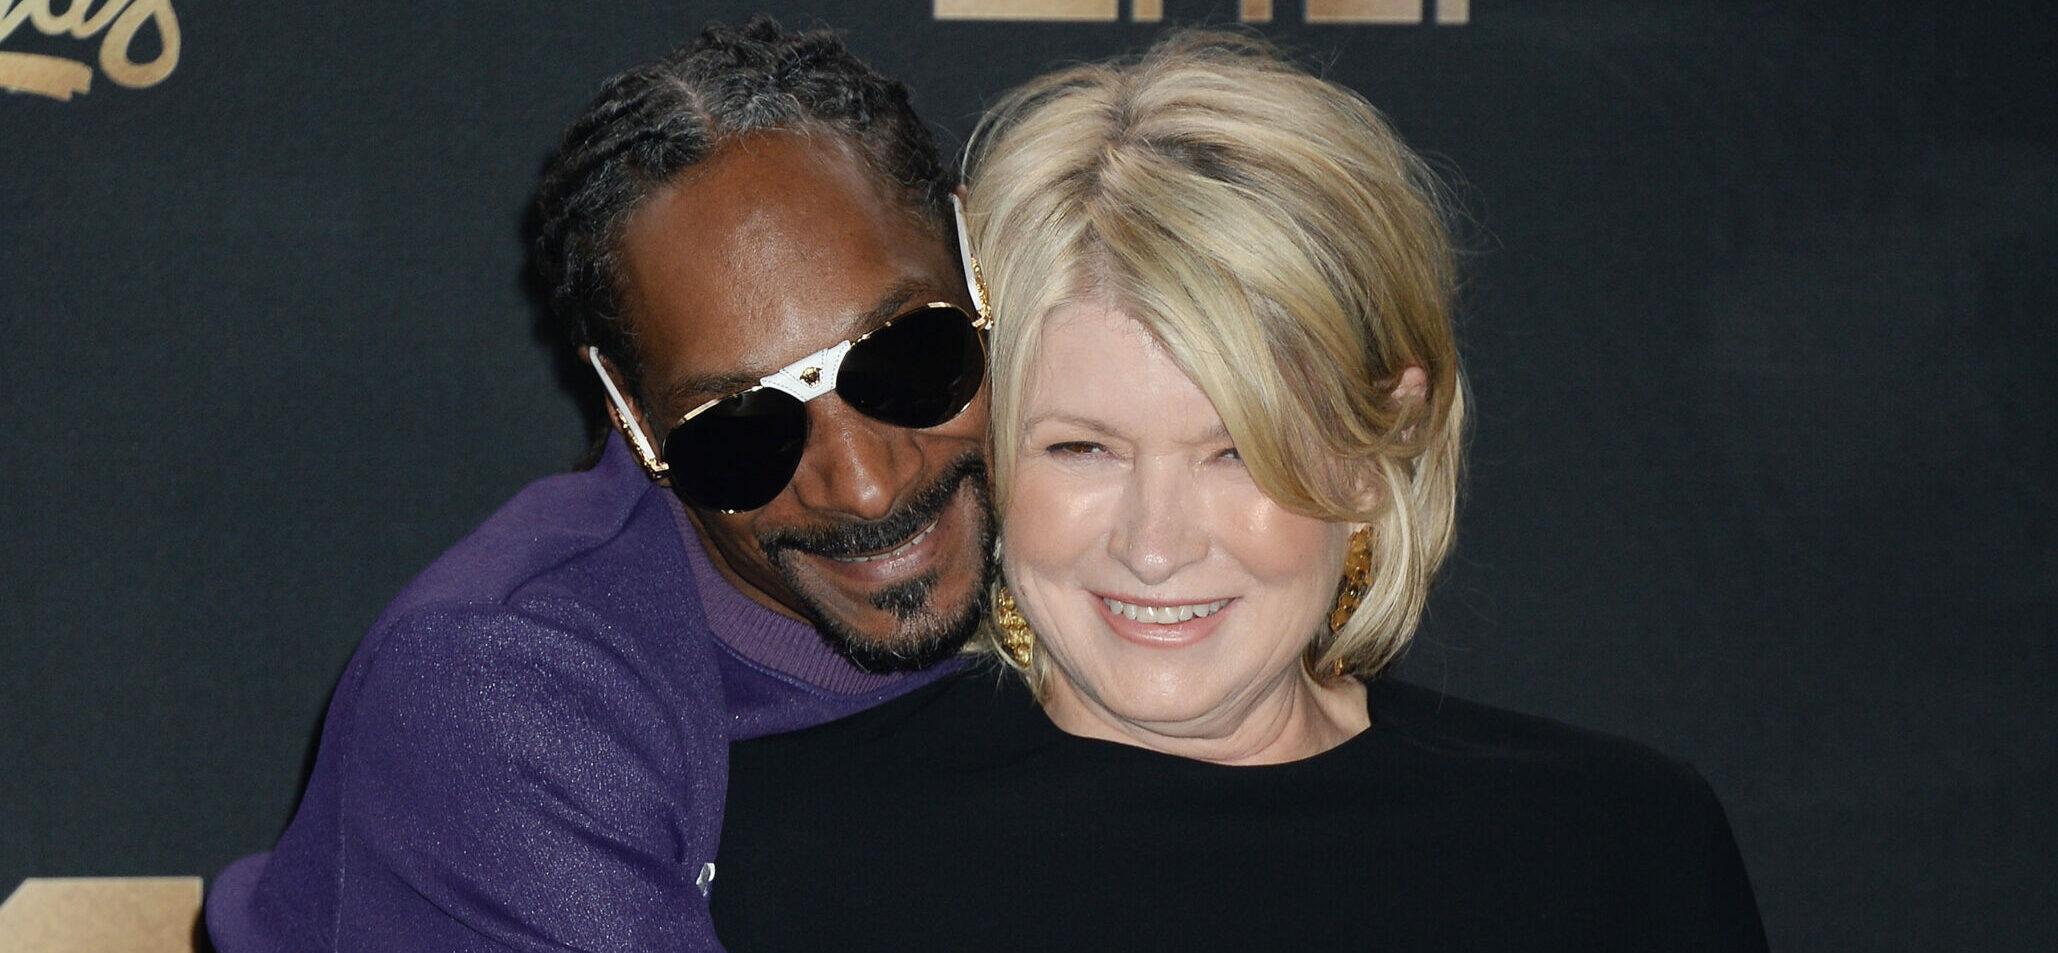 A Timeline Of Martha Stewart and Snoop Dogg's Friendship